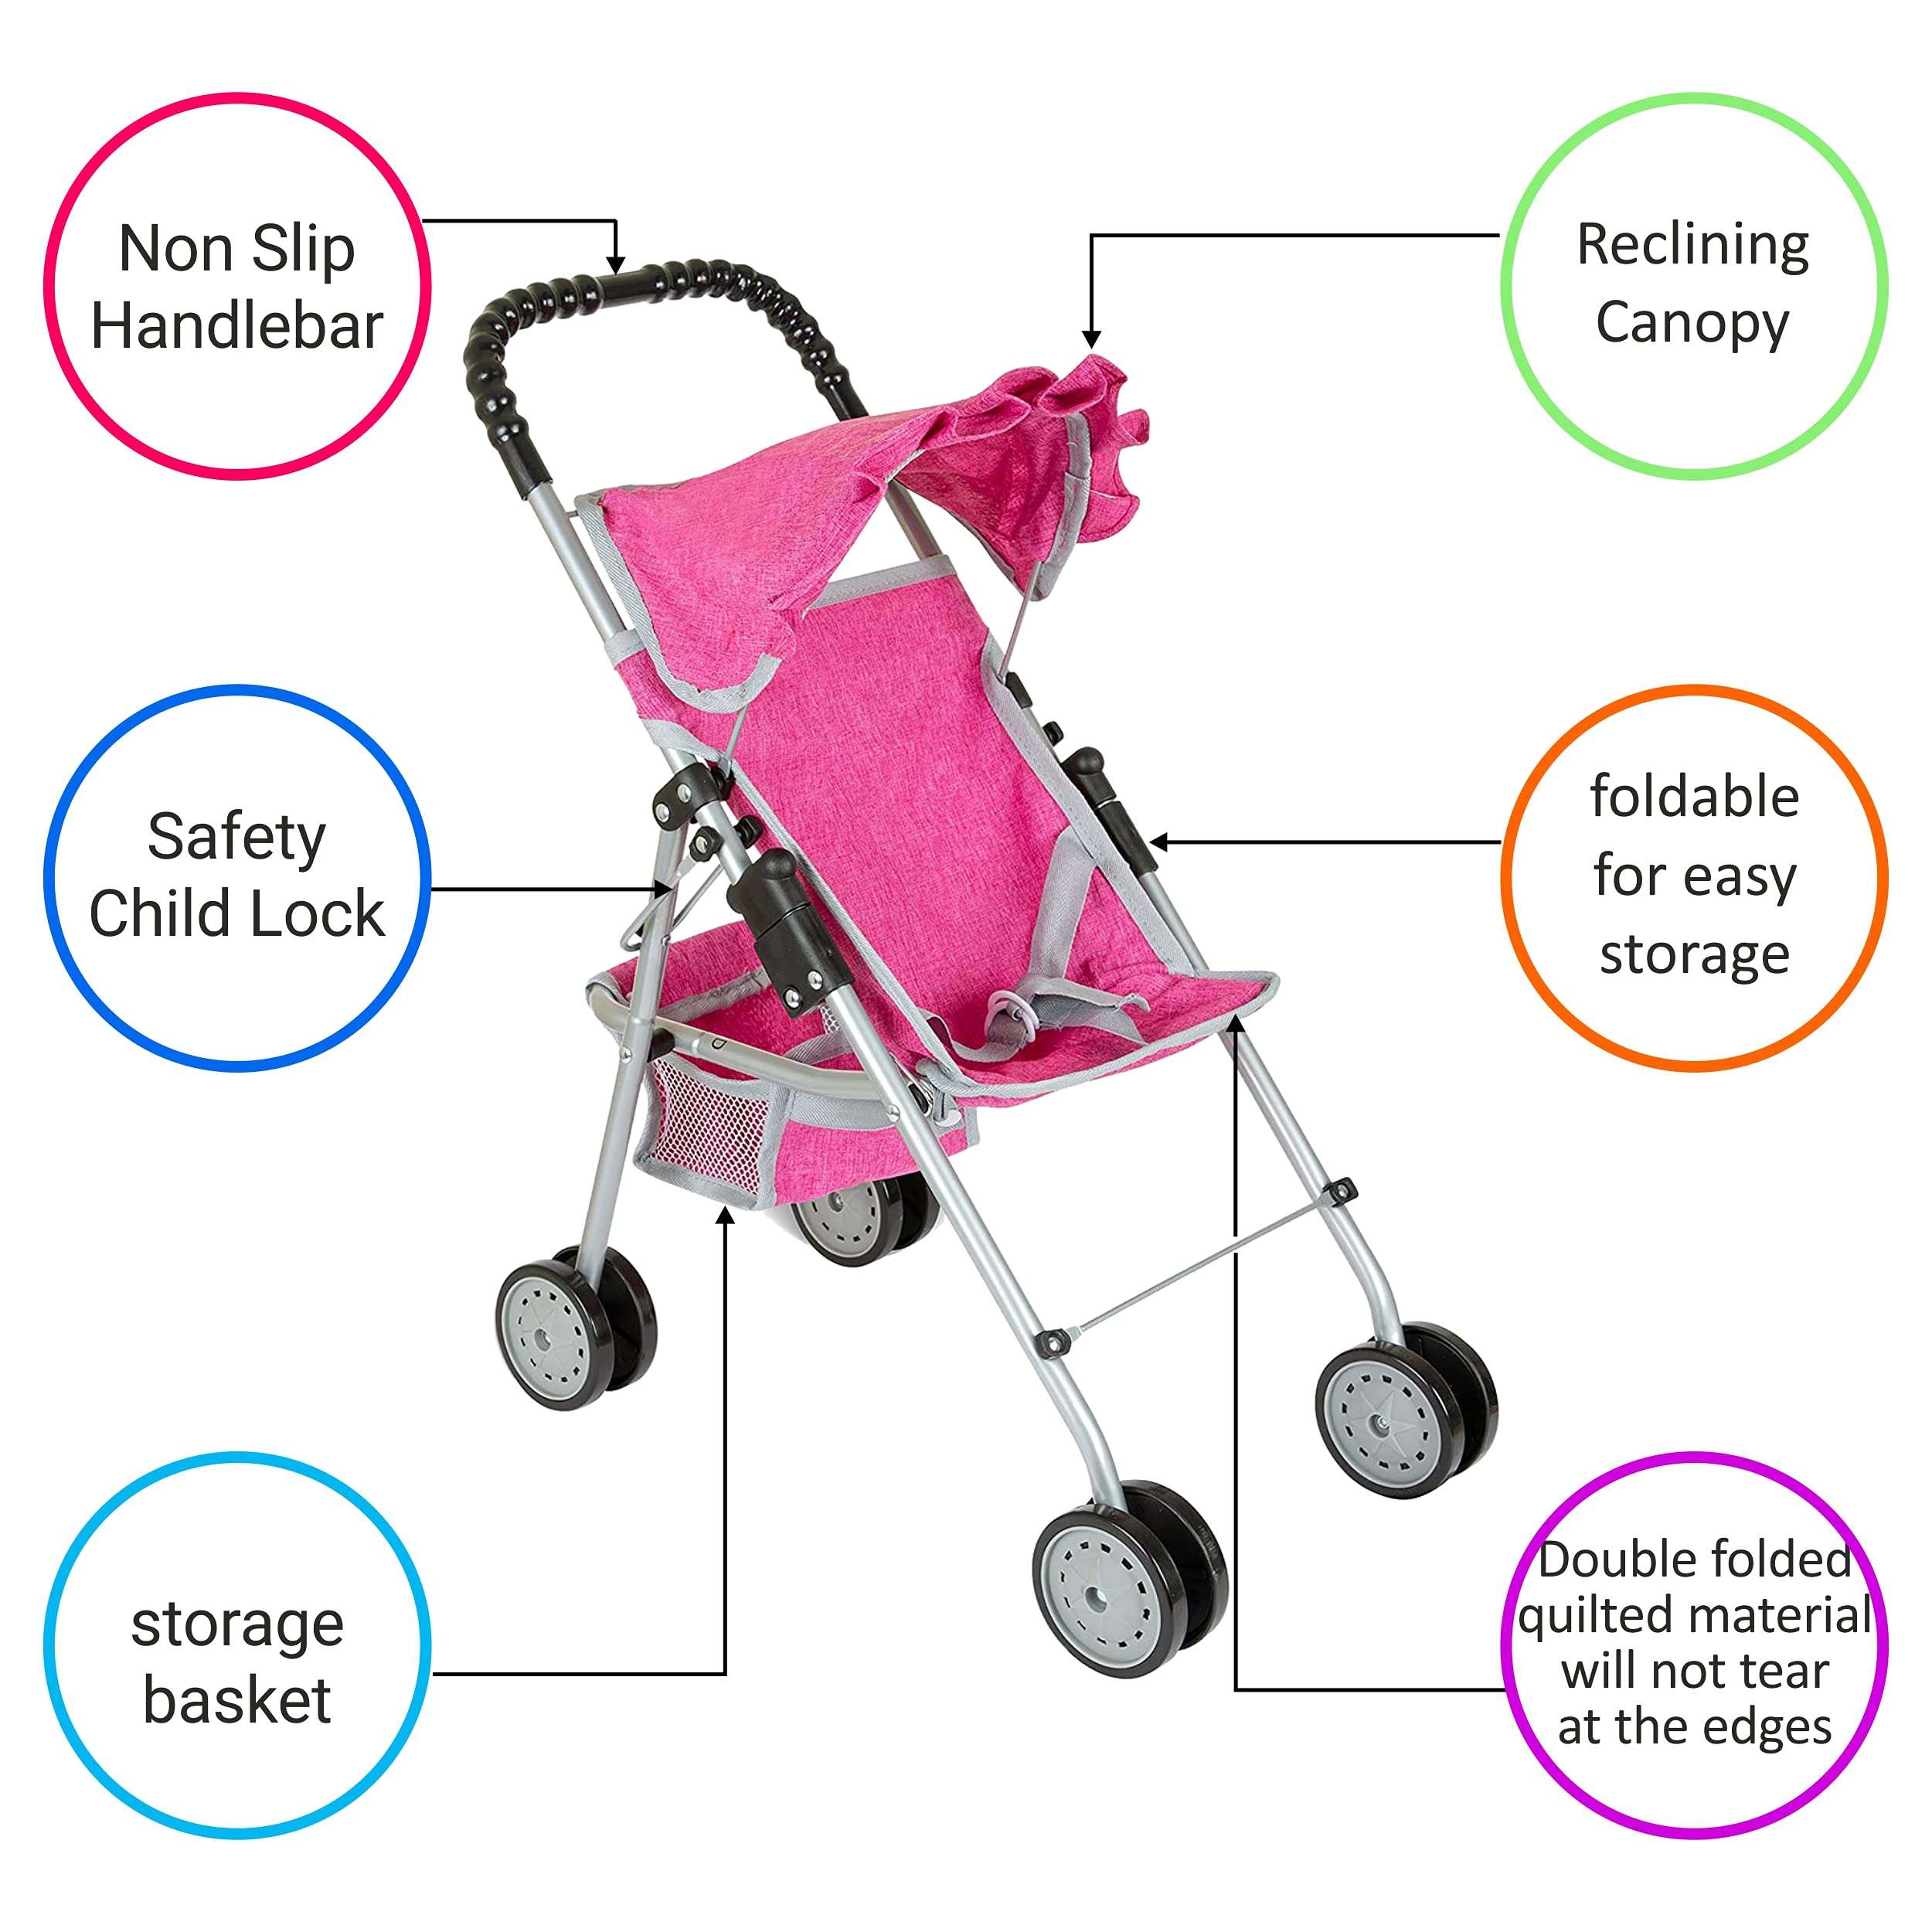 Fash N Kolor Doll Play Set Pink Denim 4 Piece Includes - Pack N Play, Doll Stroller, Doll High Chair, Infant Seat Fits Up to 18'' Doll Bag Stroller Accessories